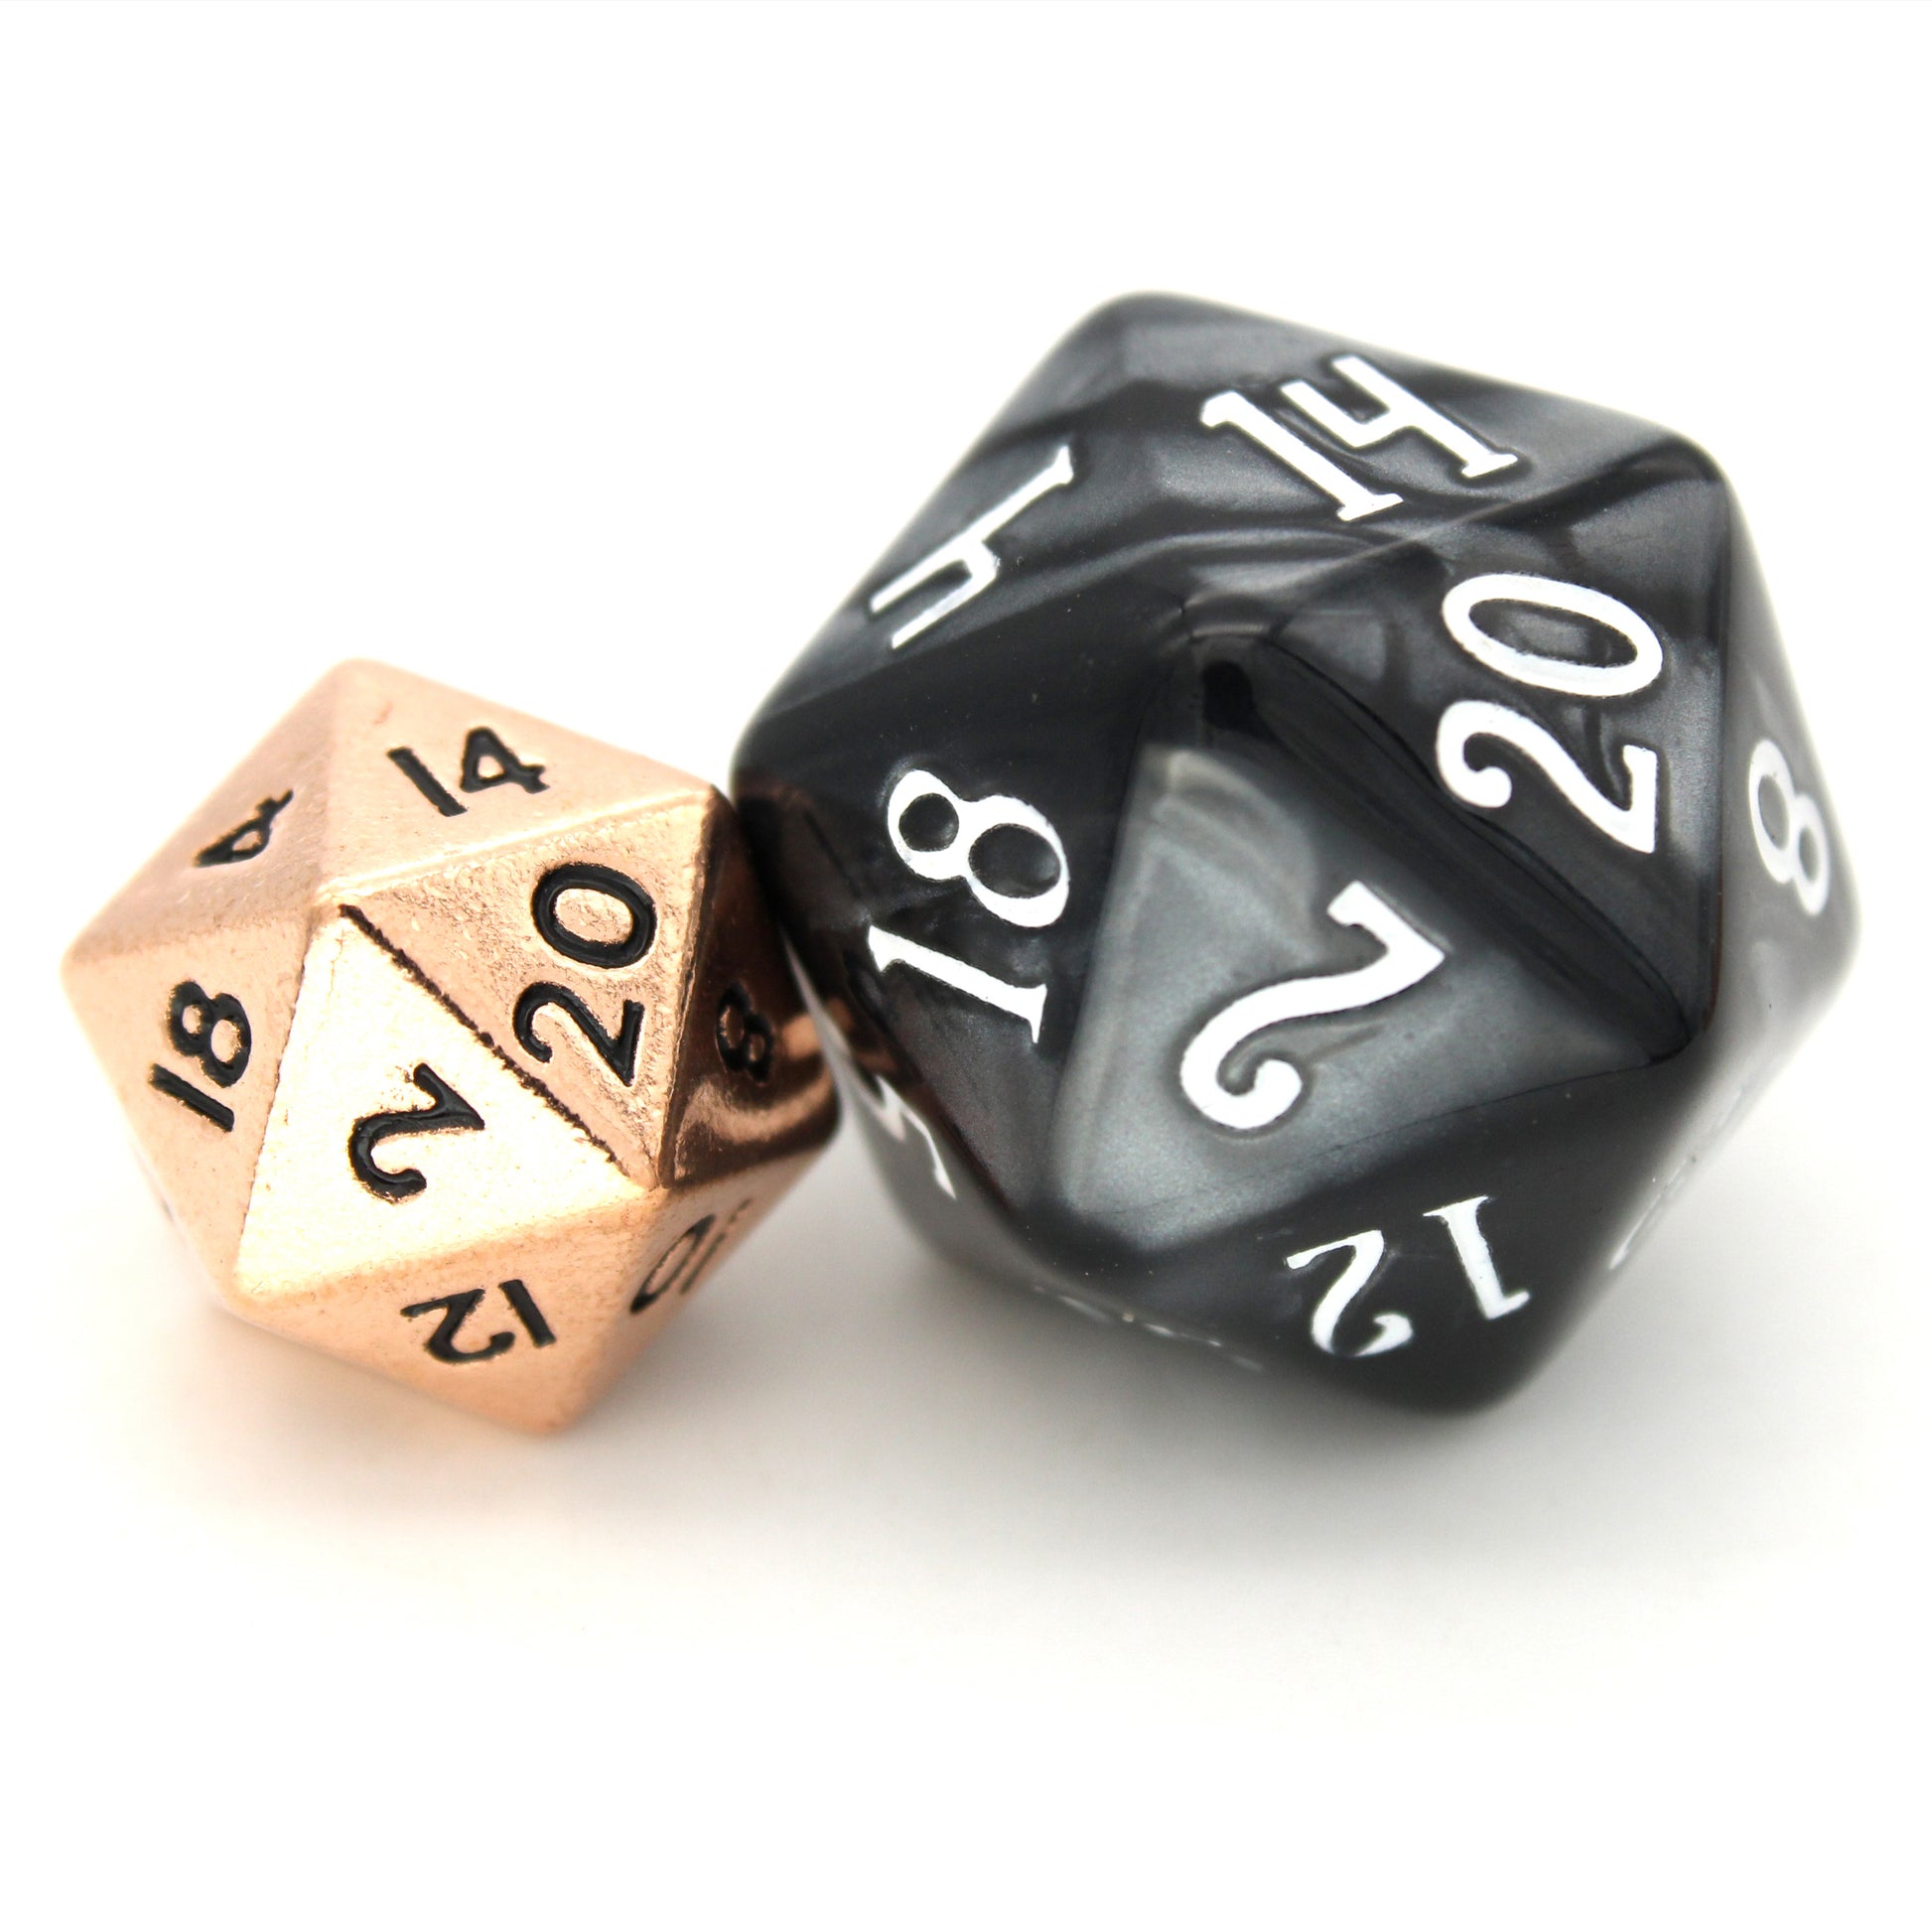 Brats is a 7-piece set of shiny rose gold 10mm metal dice.